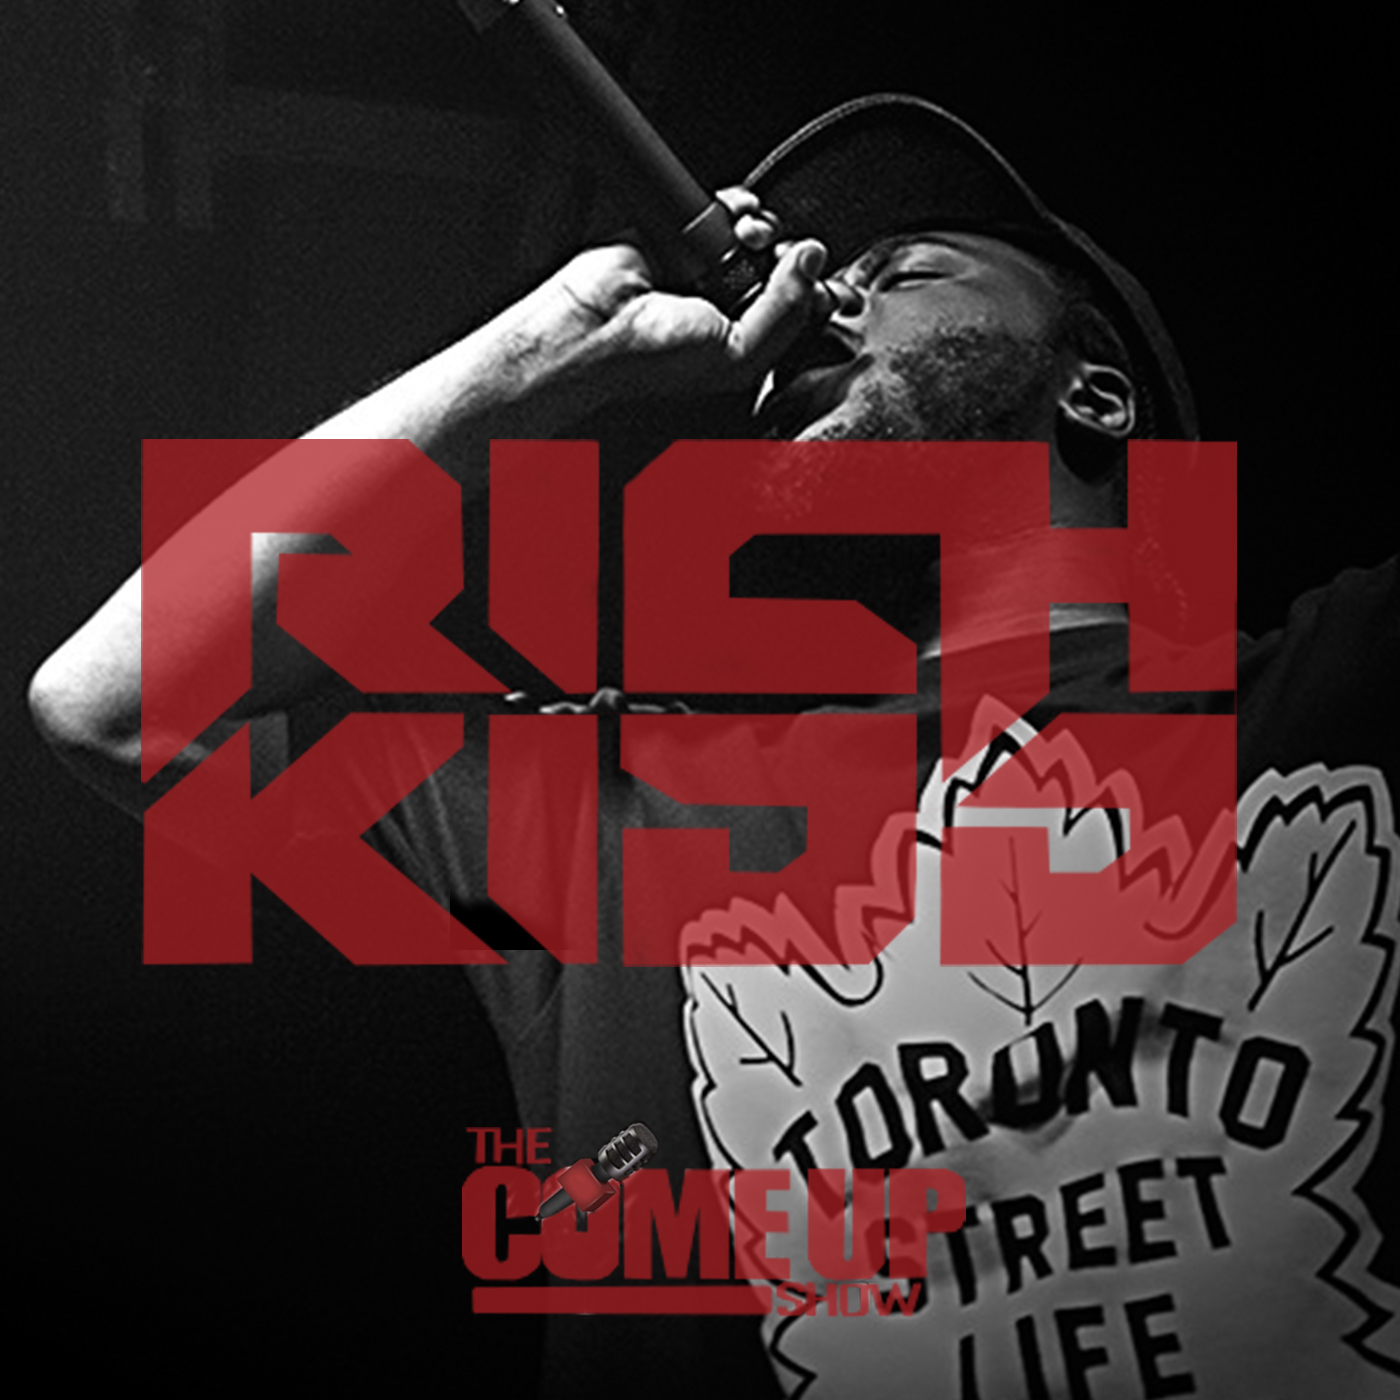 Thumbnail for "Rich Kidd talks growing up on Wu-Tang, earning respect in Canada, and learning from Young Guru".